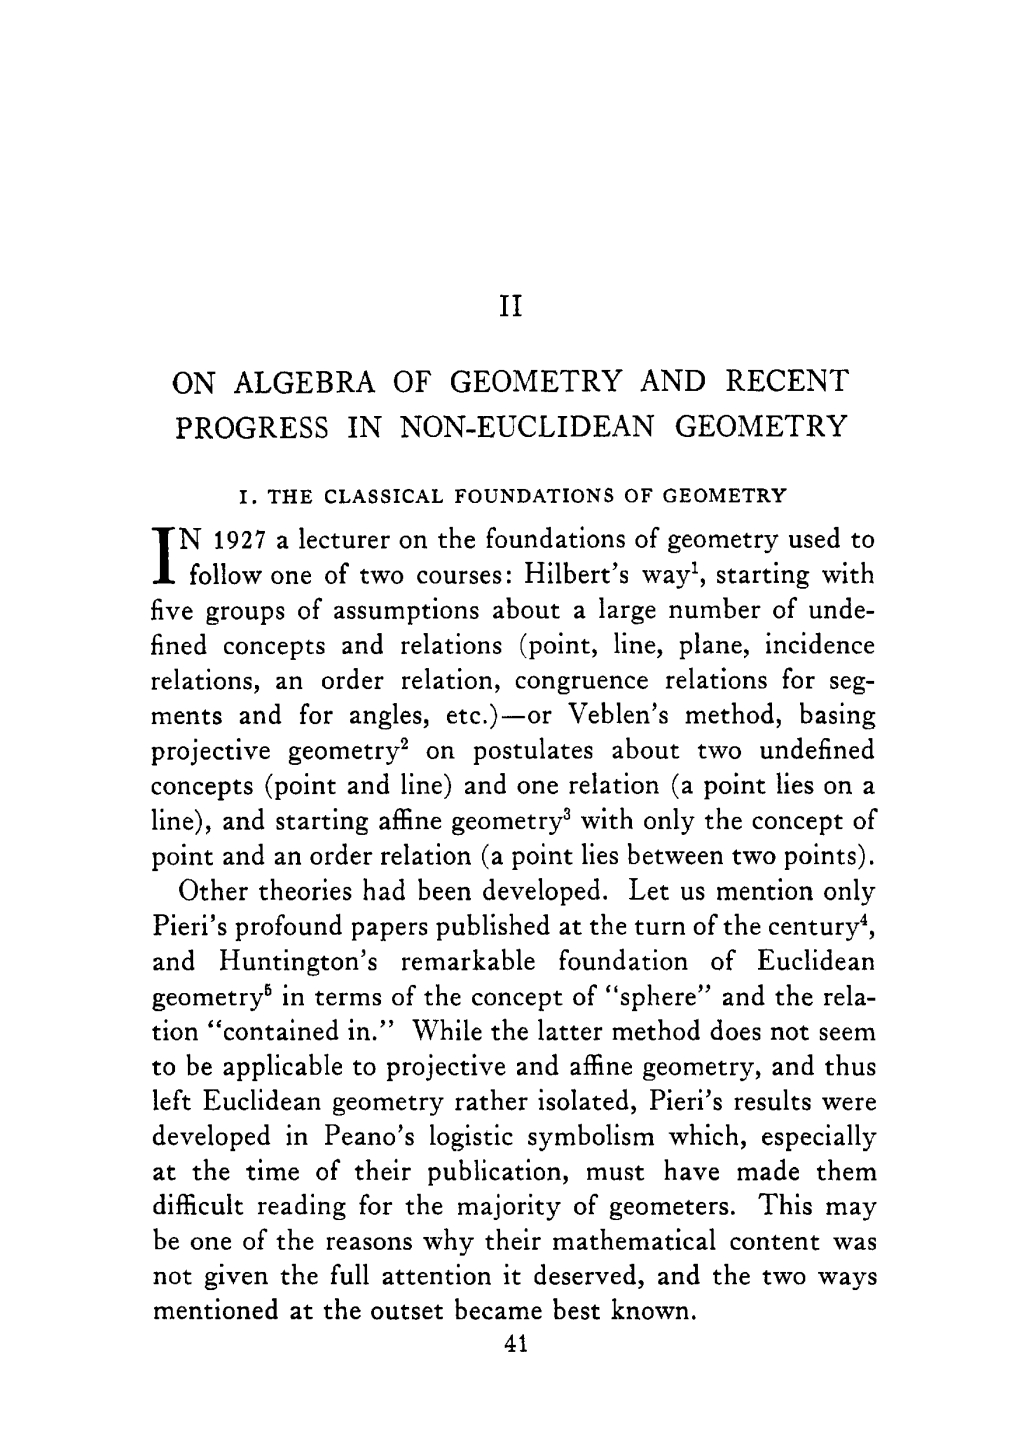 On Algebra of Geometry and Recent Progress in Non-Euclidean Geometry